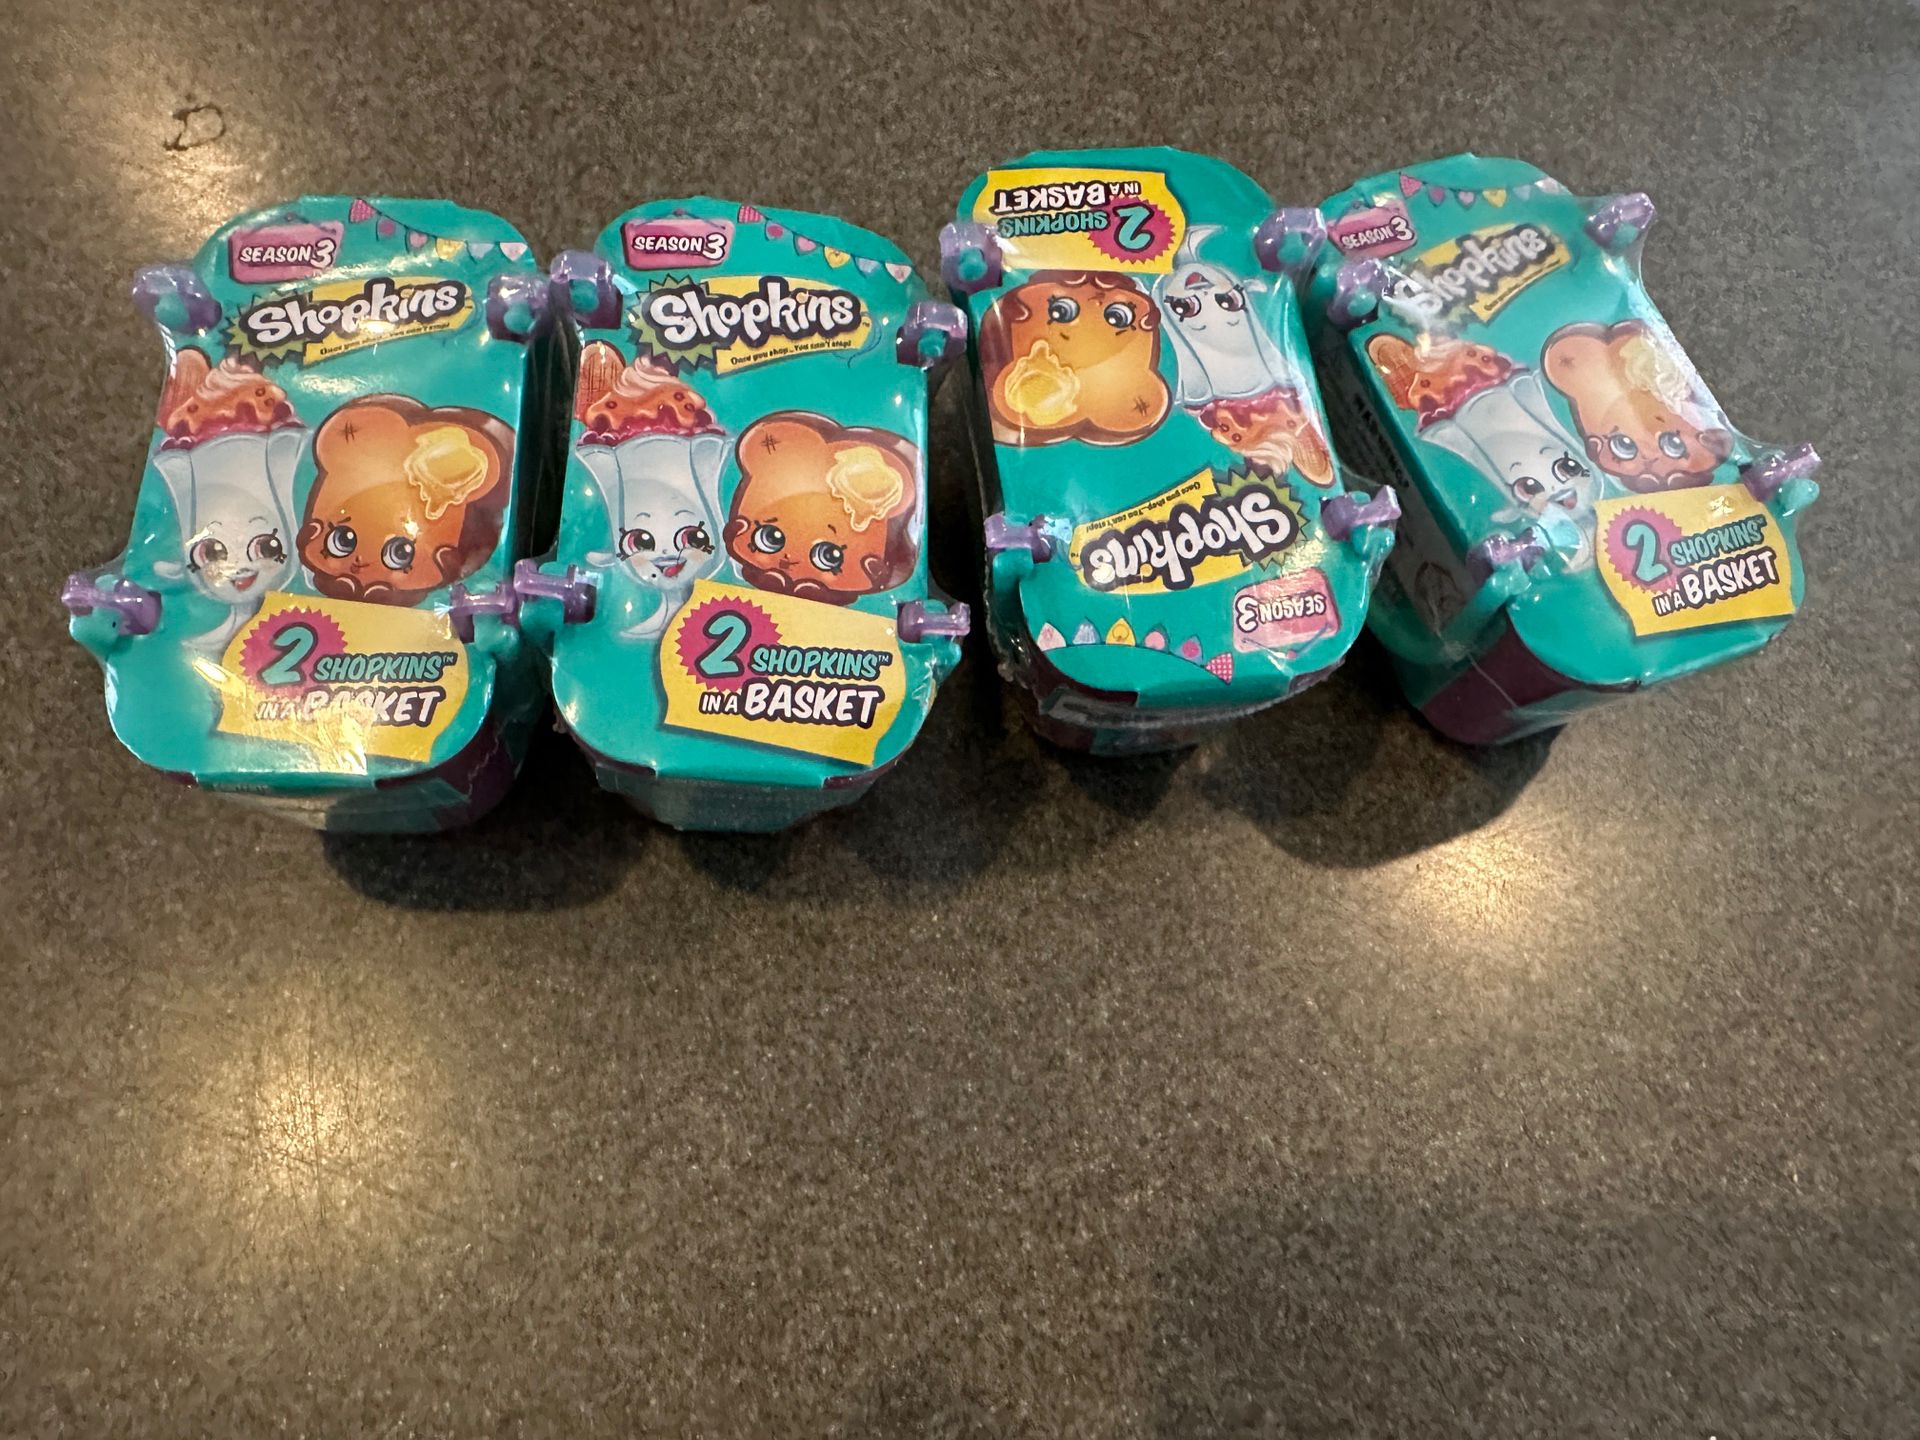 Lot Of 4 Season 3 Shopkins All For $15 Great Stocking Stuffers